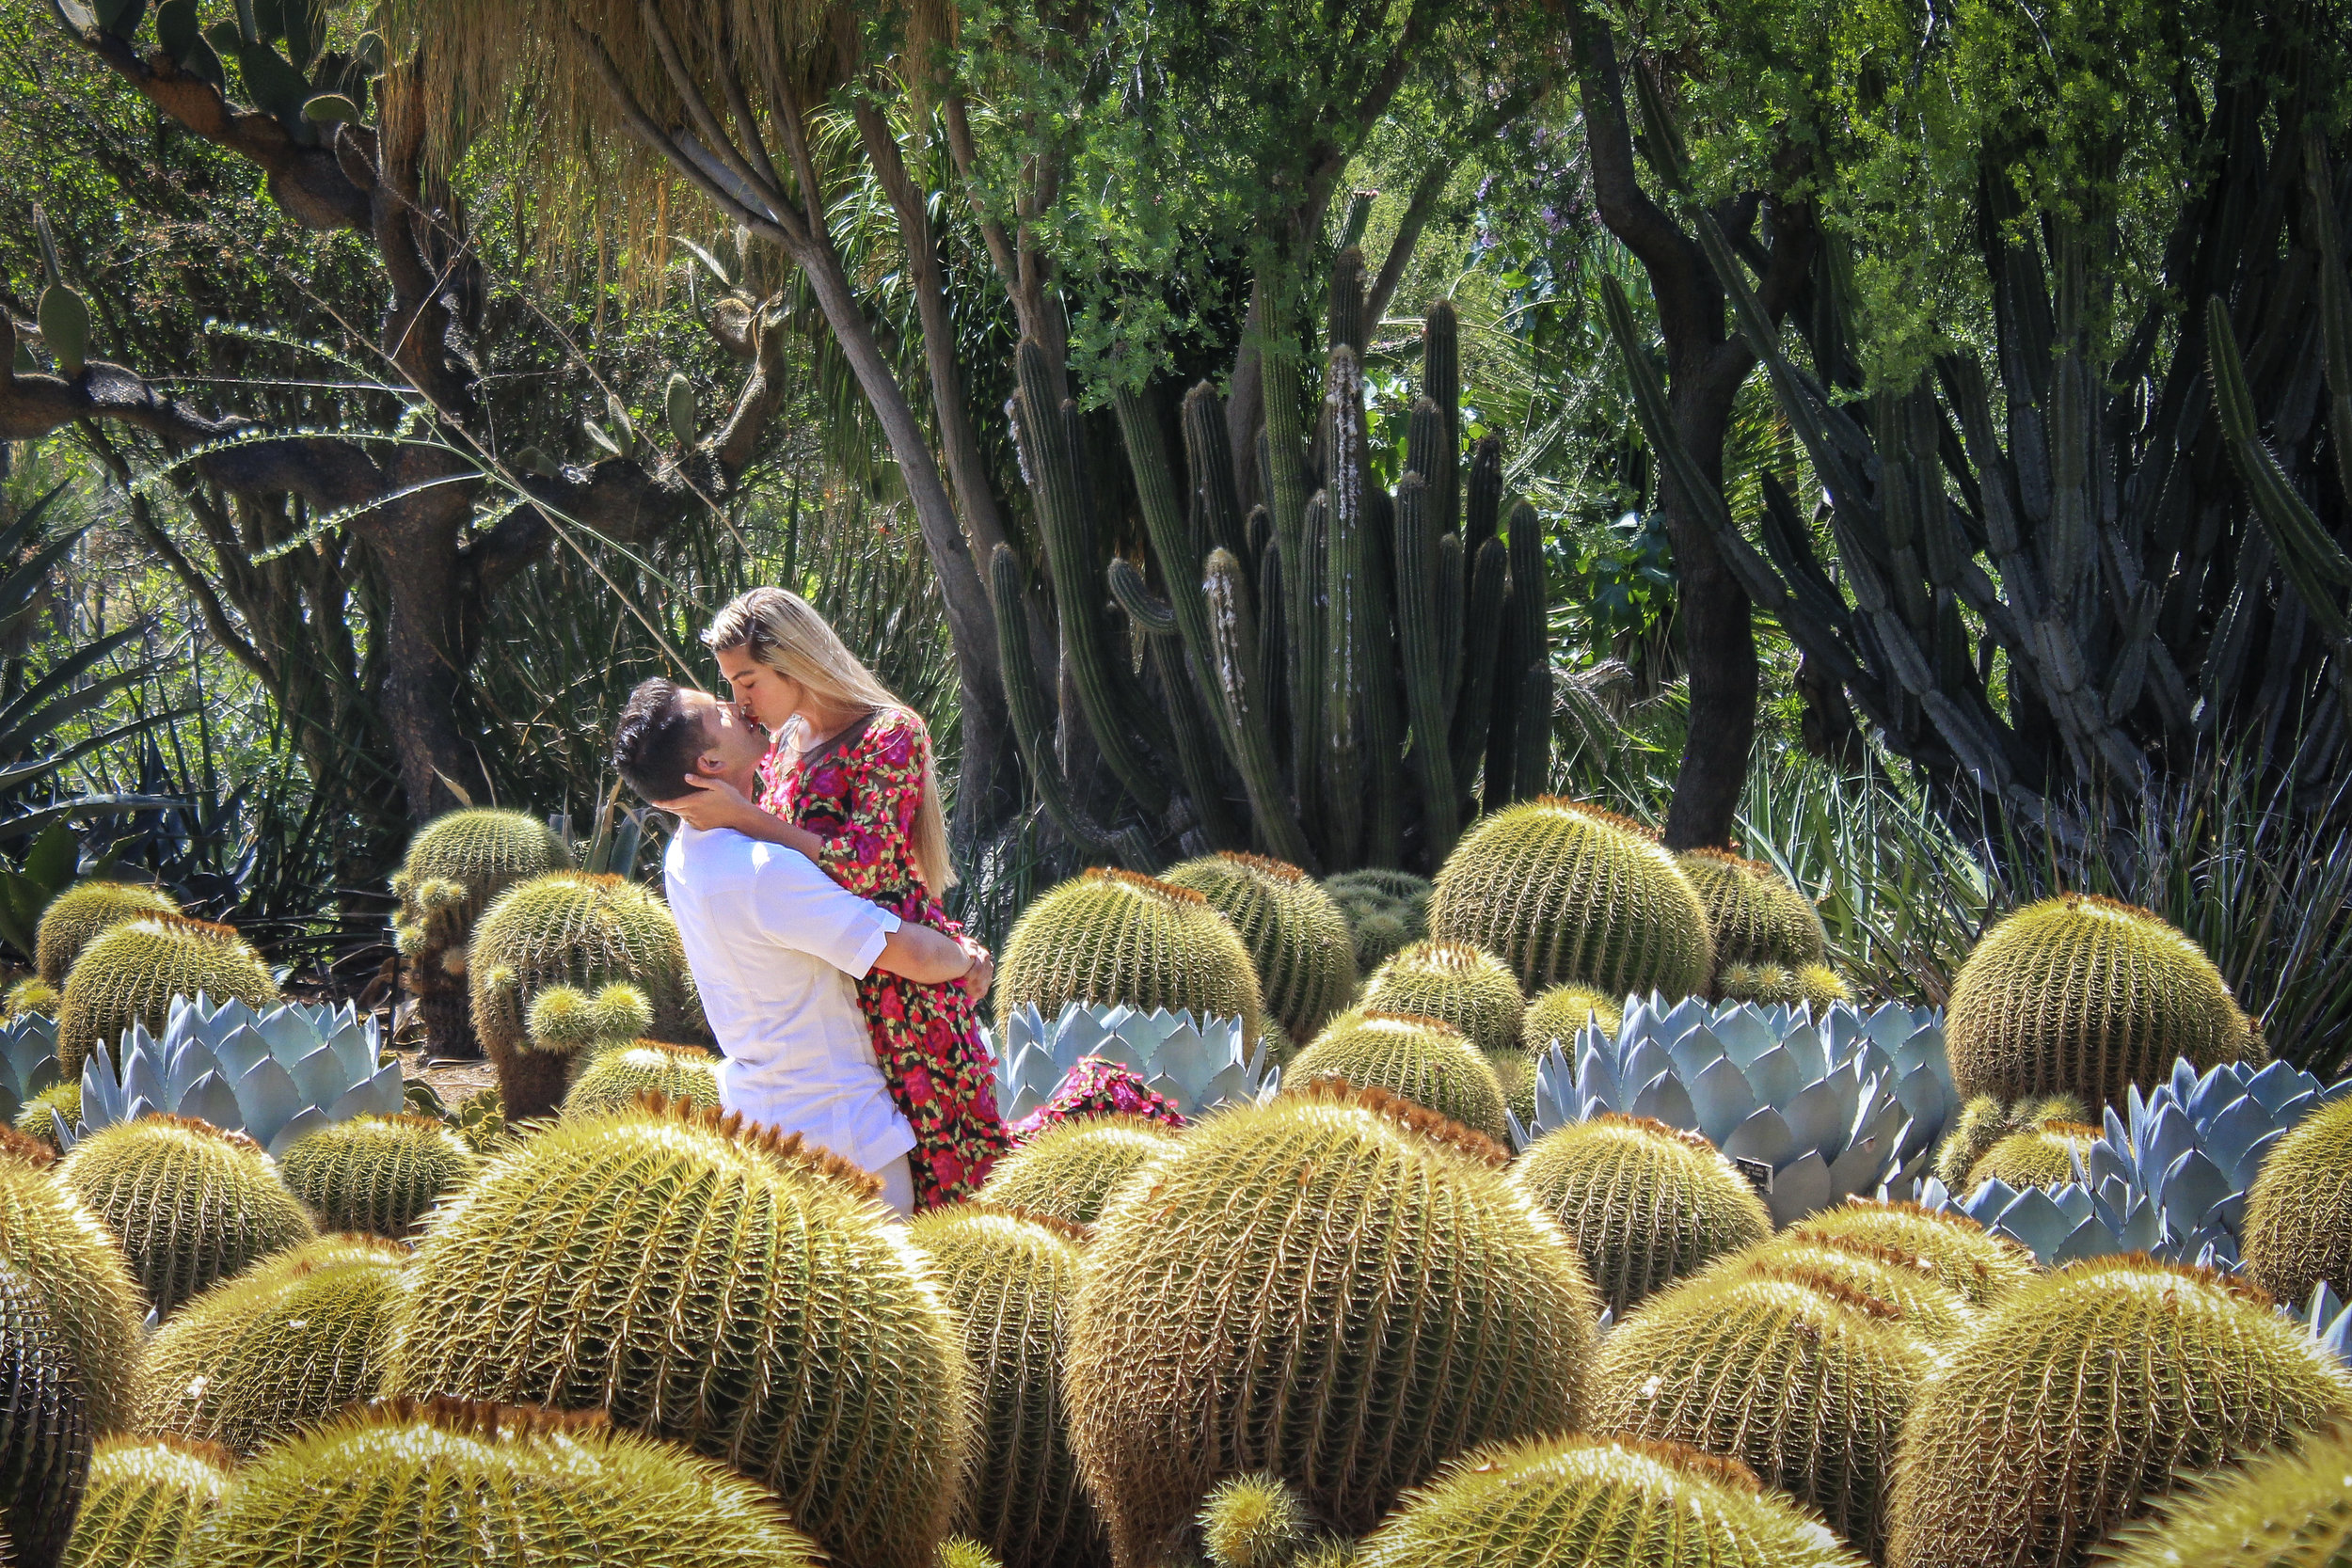 Kissing In a cactus patch